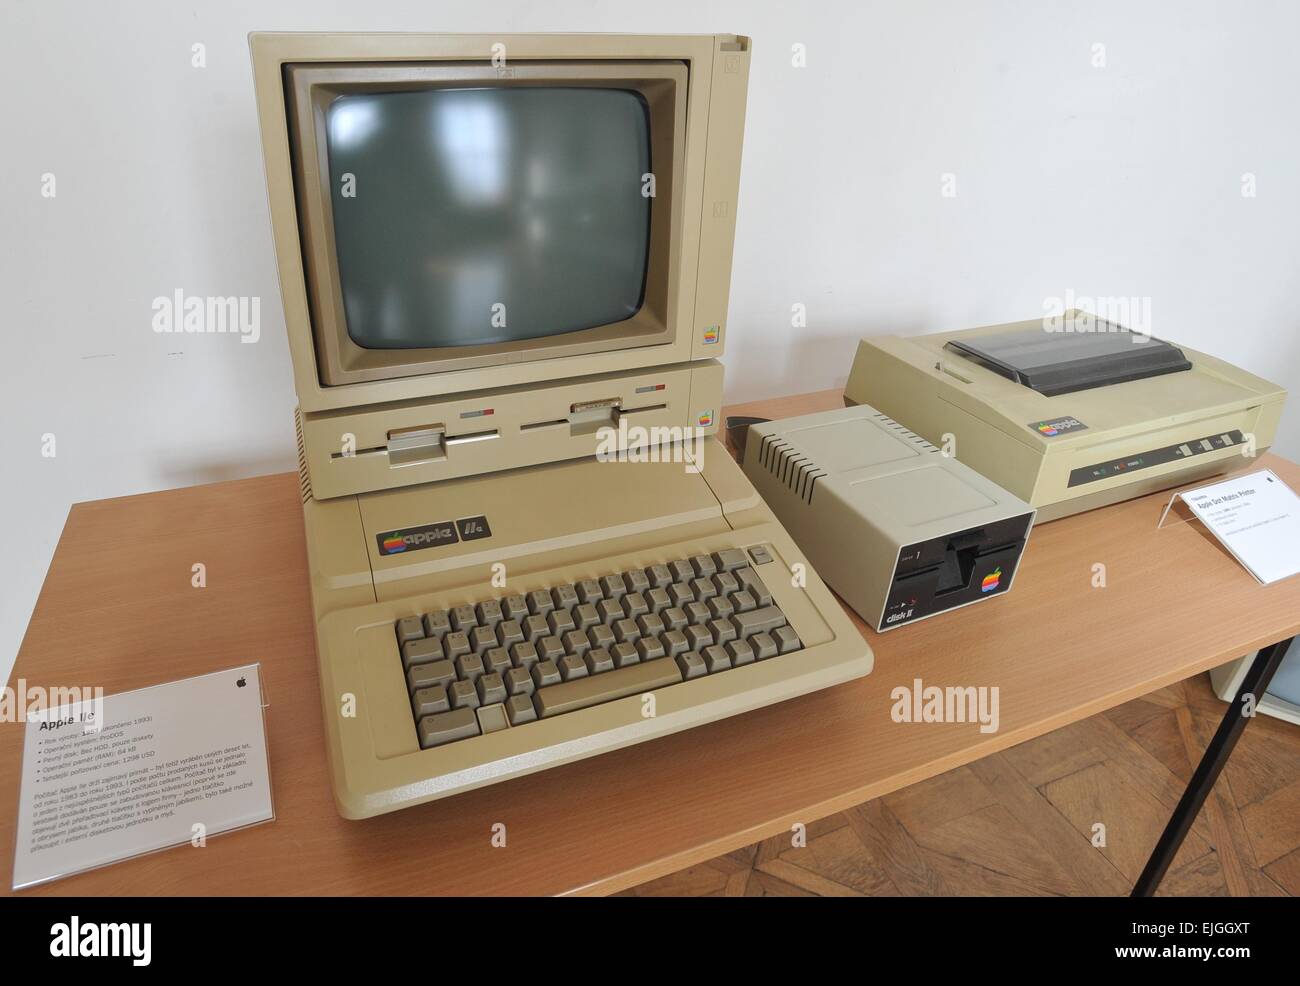 Start of an exhibition focused on historical computers of US company Apple, including rare computers like Apple Lisa, first Macintosh, Power Mac G4 Cube and pictured Apple IIe took place in chateau Slavkov - Austerlitz, Slavkov near Brno, Czech Republic, March 26, 2015. (CTK Photo/Igor Zehl) Stock Photo